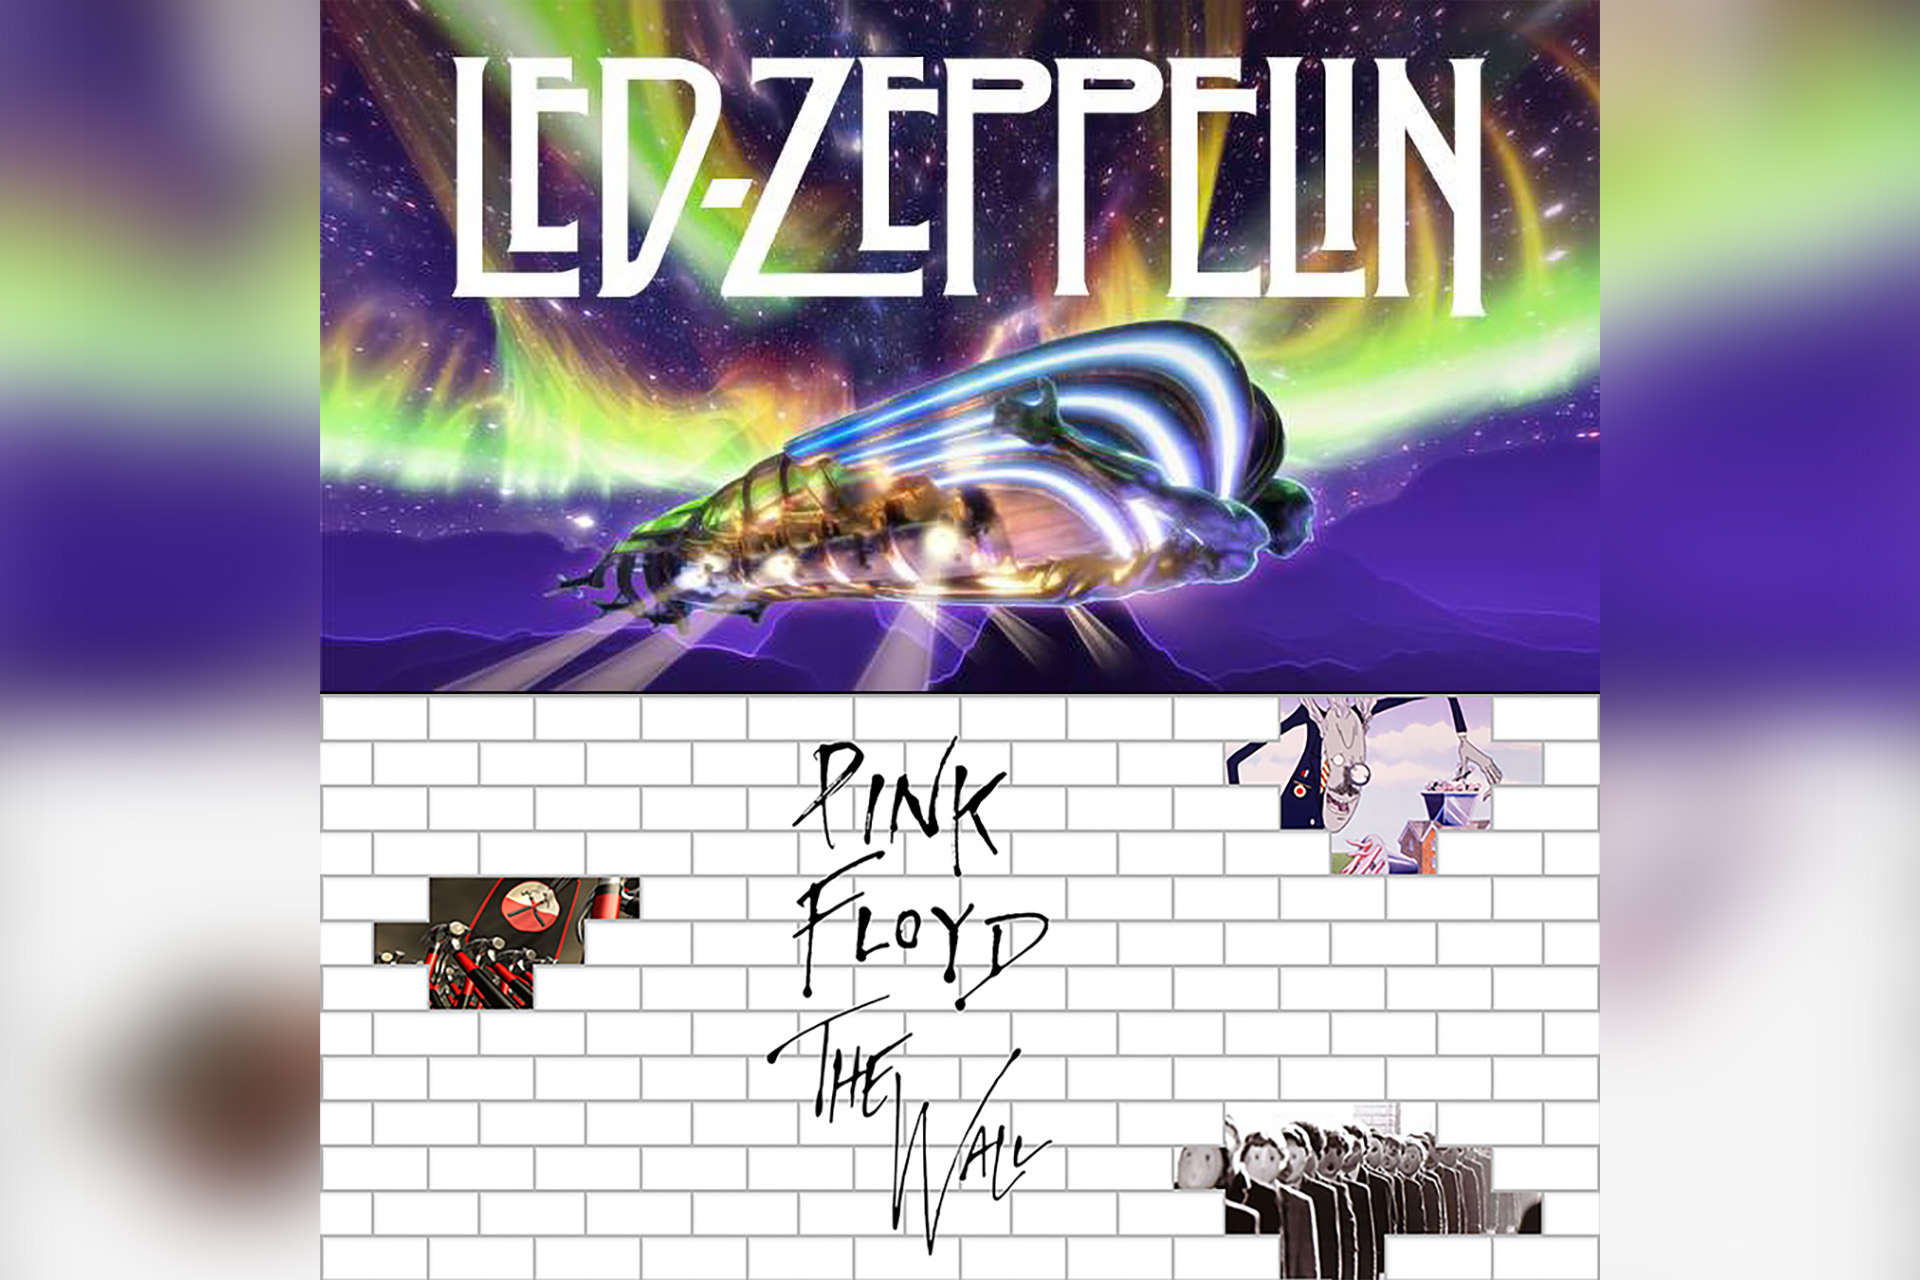 Pink Floyd and Led Zeppelin graphic